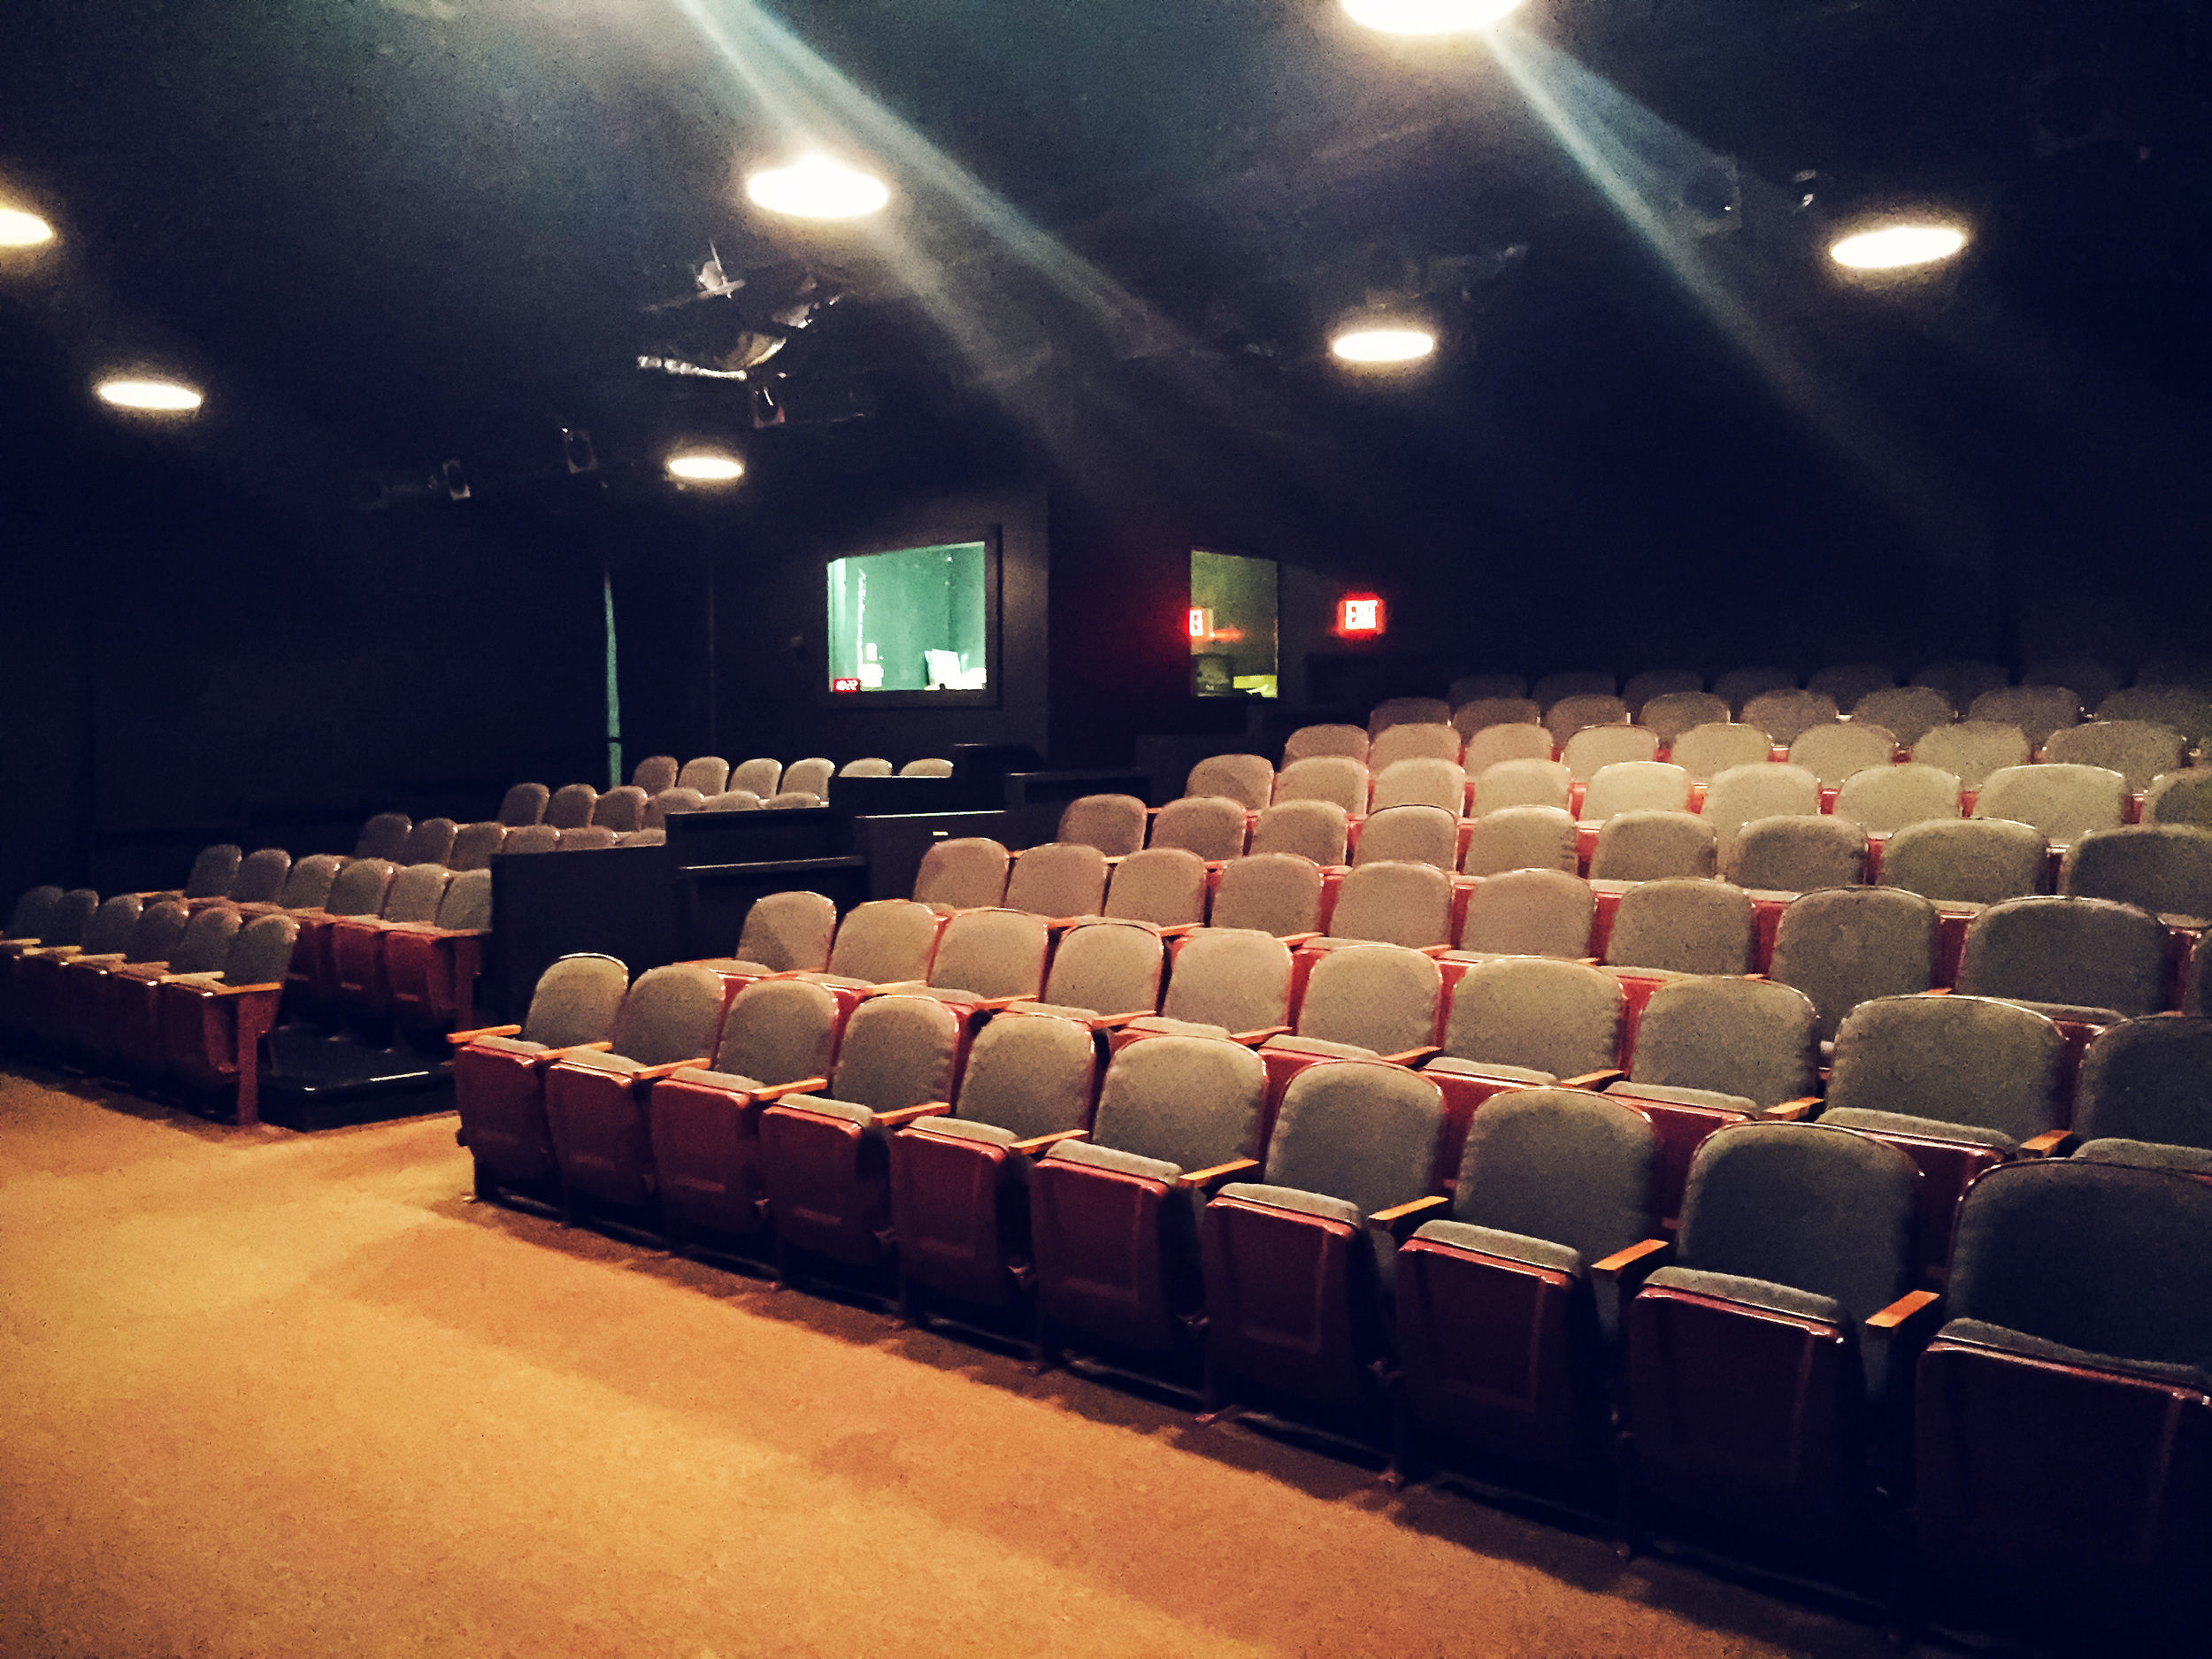 Our 120-seat black box theater